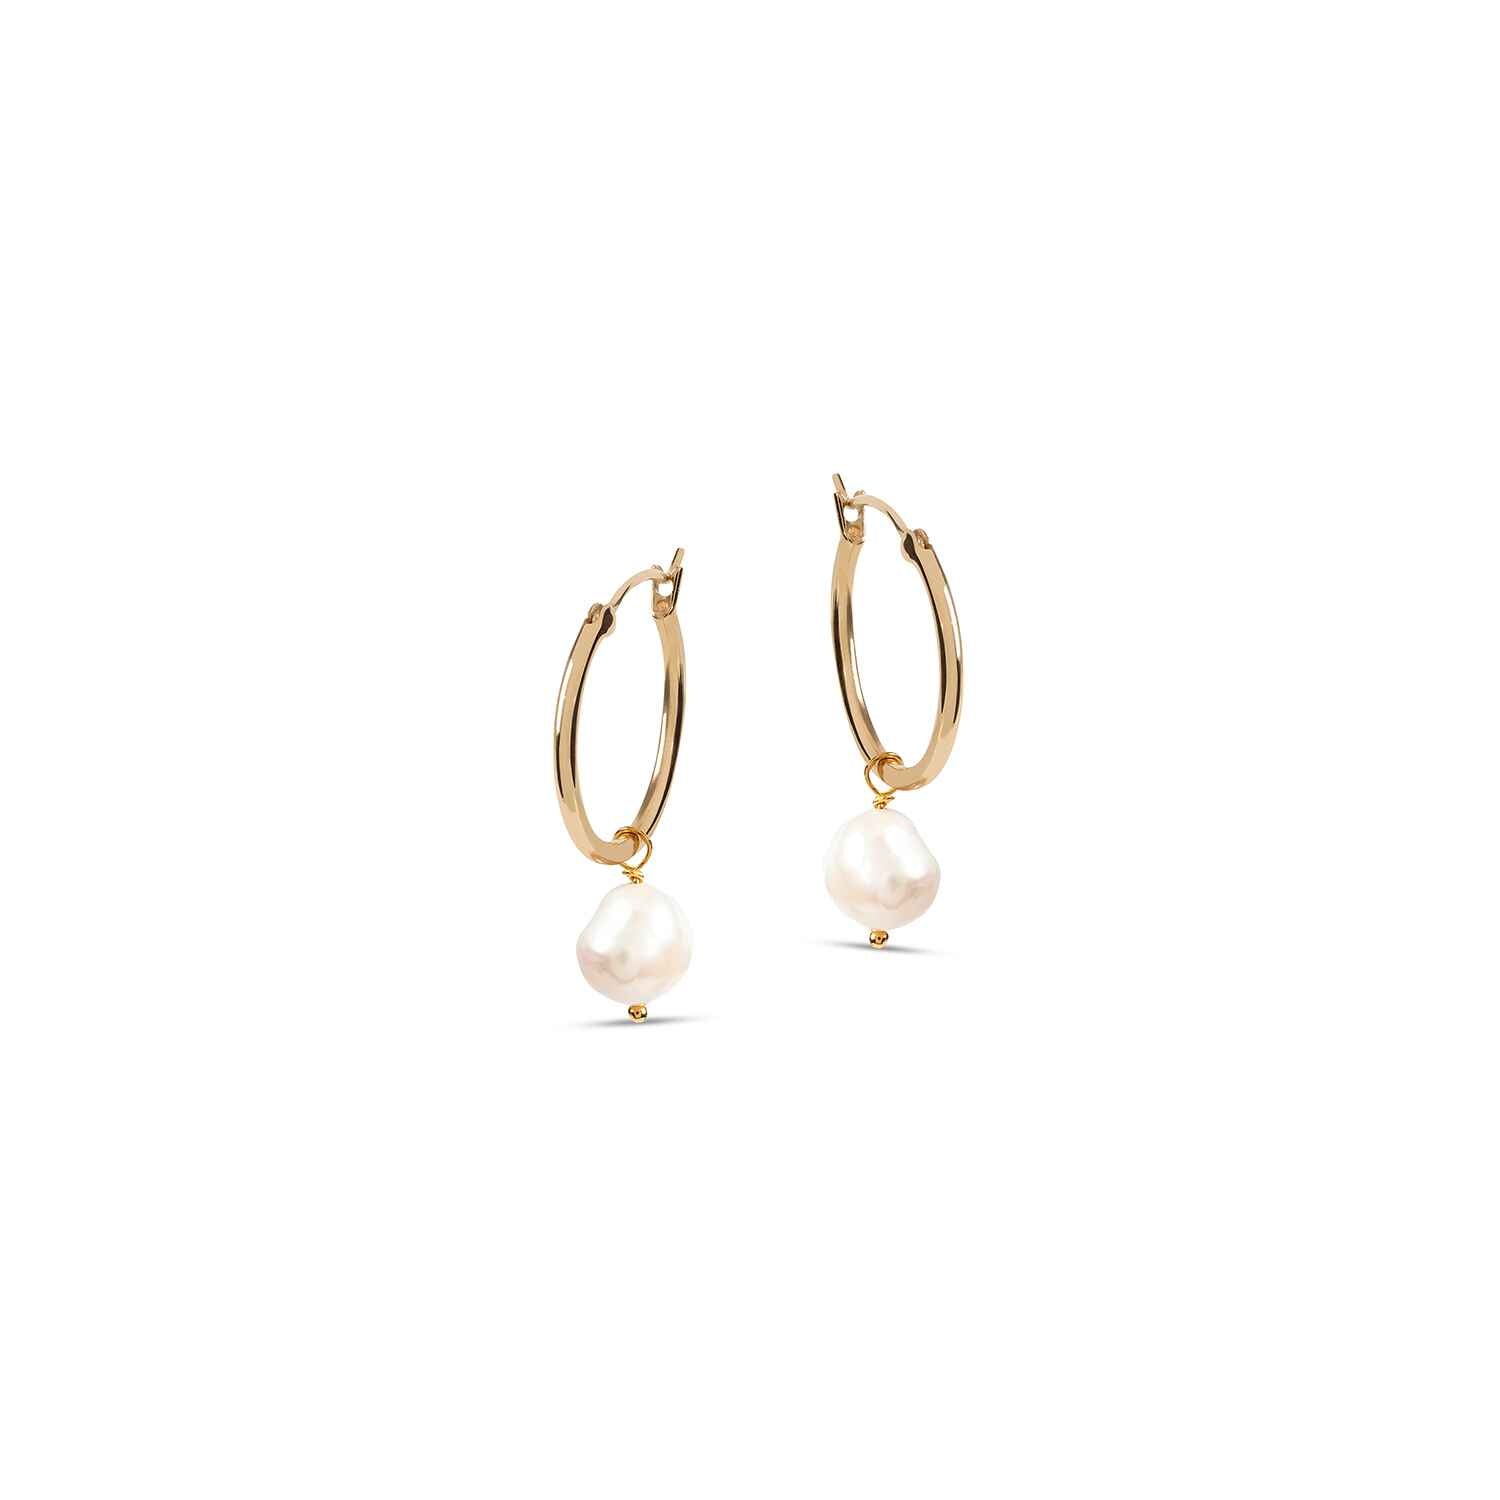 The sustainable star of any stack: stunning vintage baroque pearls with recycled gold hoops.